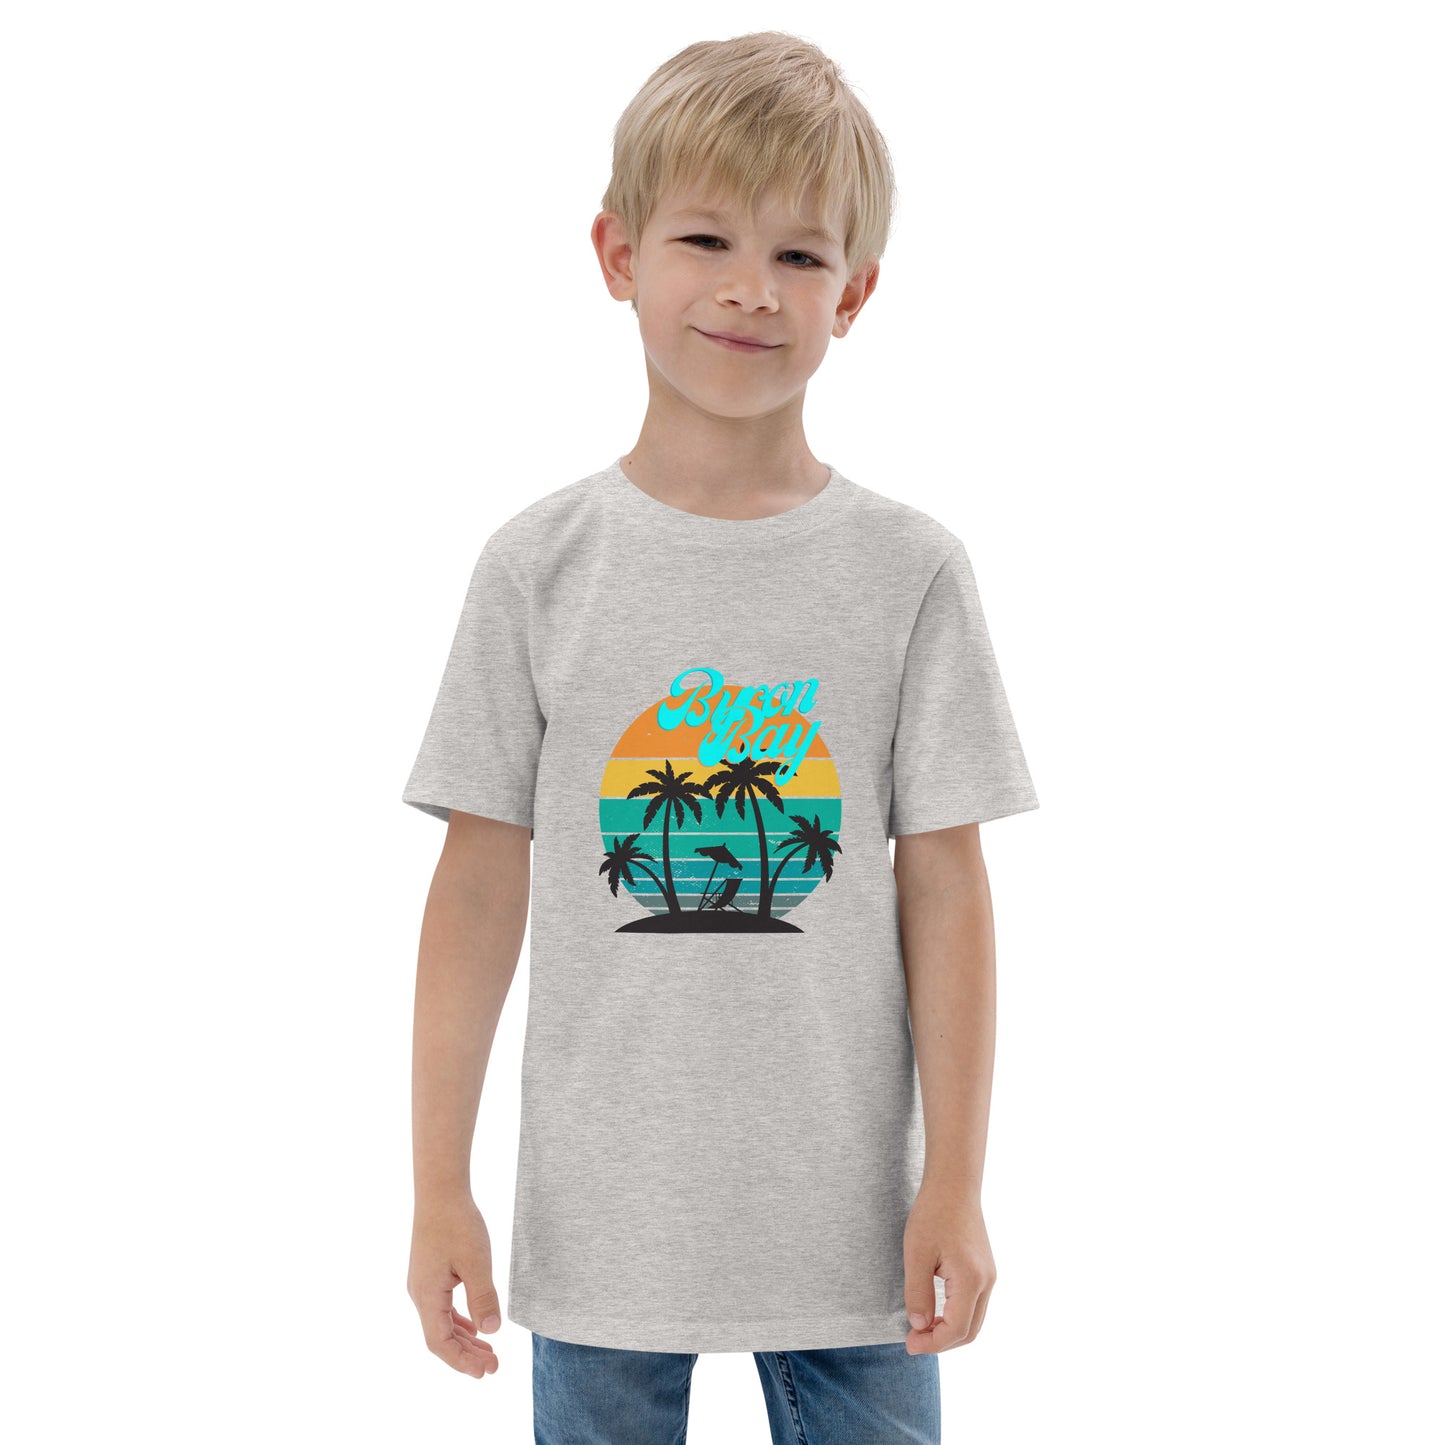  Kids T-Shirt - Natural / Heather colour - Front view, being warn on boy standing with his arms by his side - Byron Bay design on front - Genuine Byron Bay Merchandise | Produced by Go Sea Kayak Byron Bay 